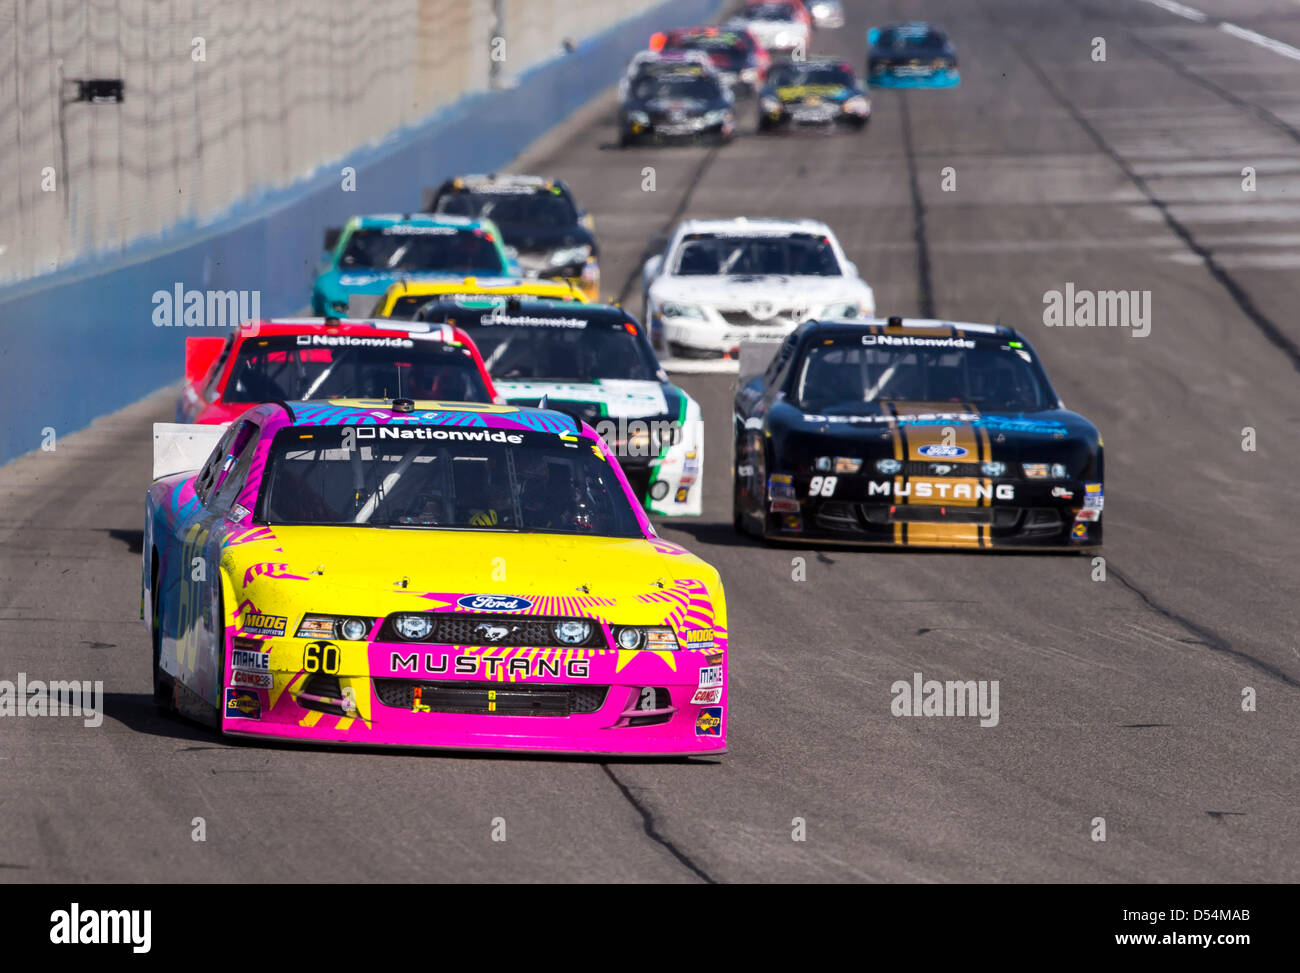 Fontana, California, USA. 23rd March 2013. Travis Pastrana (60) takes to the track for the Royal Purple 300 at the Auto Club Speedway in FONTANA, CA. Credit:  Cal Sport Media / Alamy Live News Stock Photo